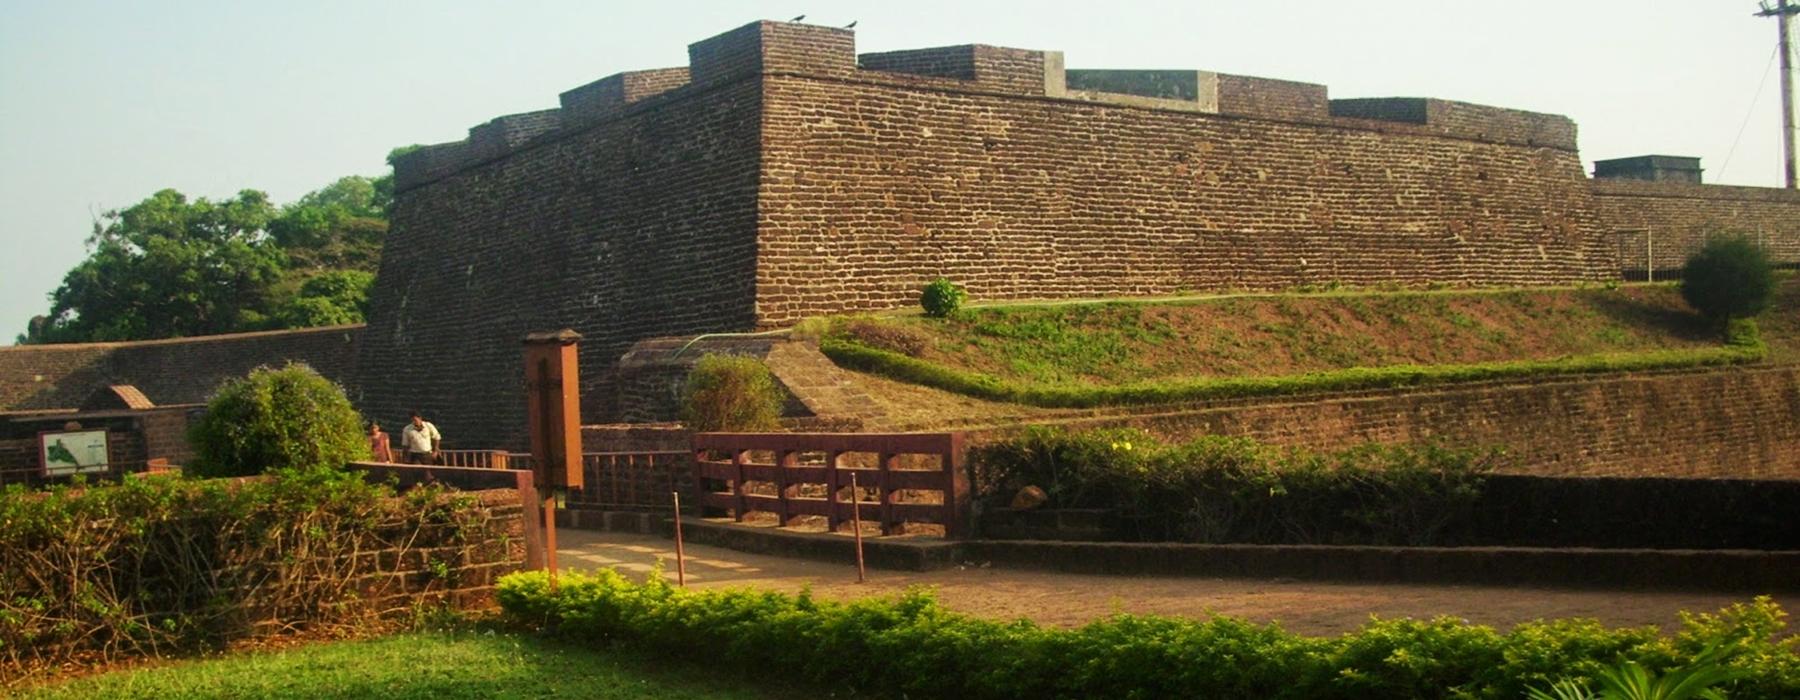 St Angelo Fort